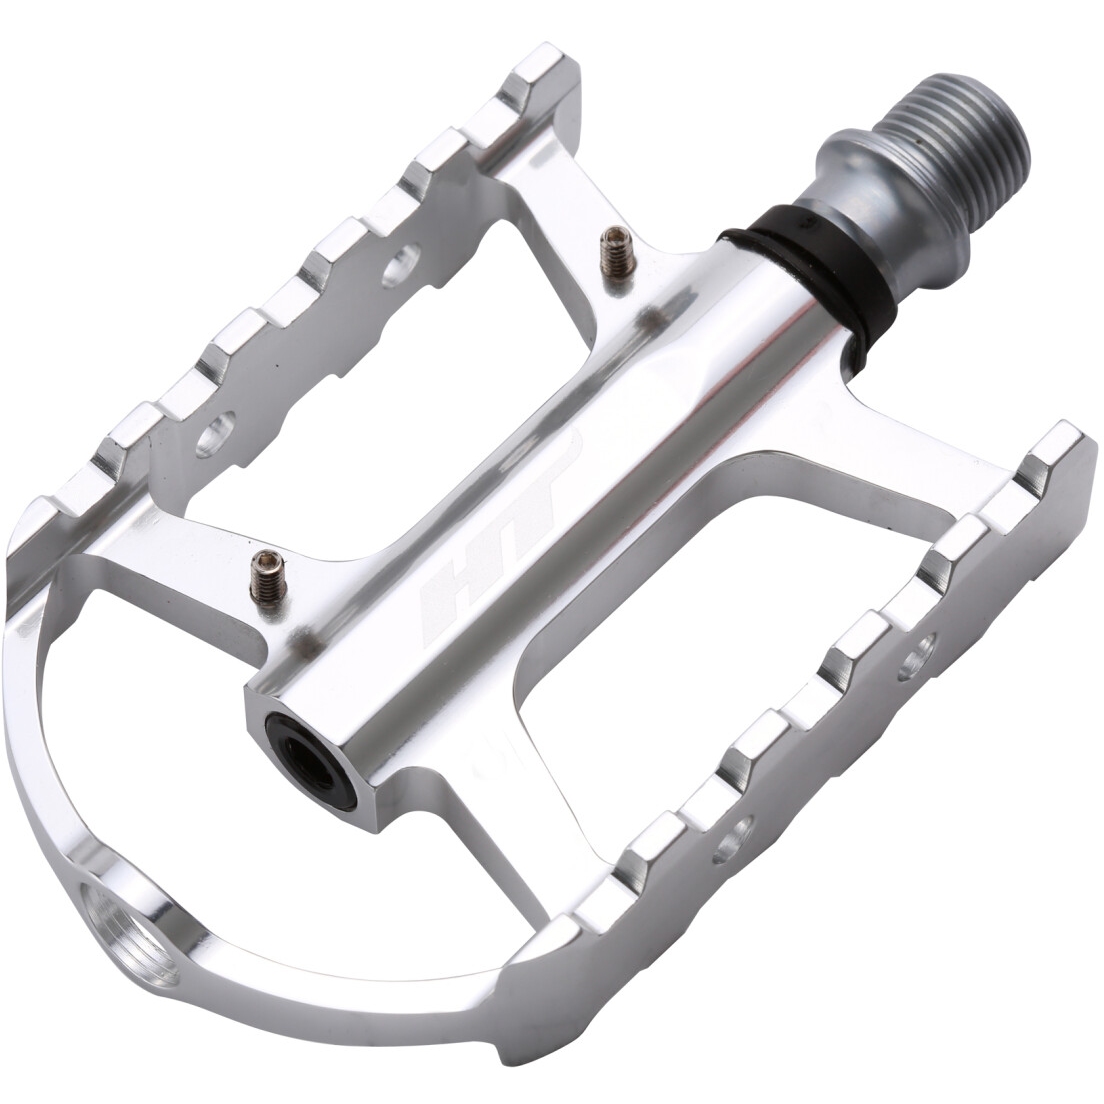 Picture of HT ARS02 Cheetah-S Pedals - silver